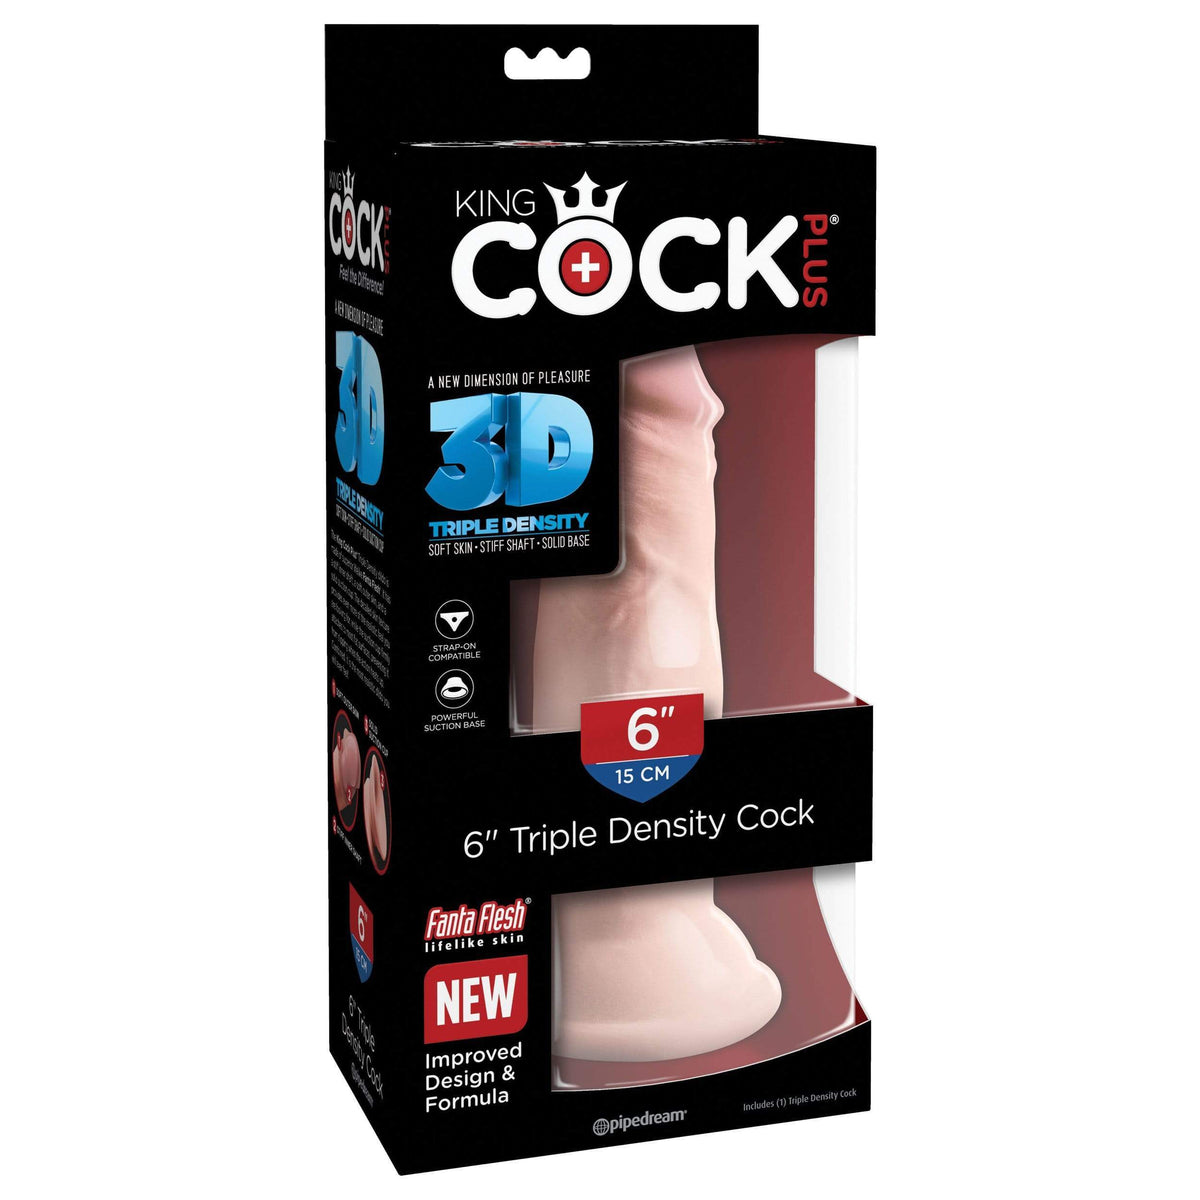 Pipedream - King Cock Plus 3D Triple Density Cock Dildo 6&quot; (Beige) Realistic Dildo with suction cup (Non Vibration) 603912762464 CherryAffairs